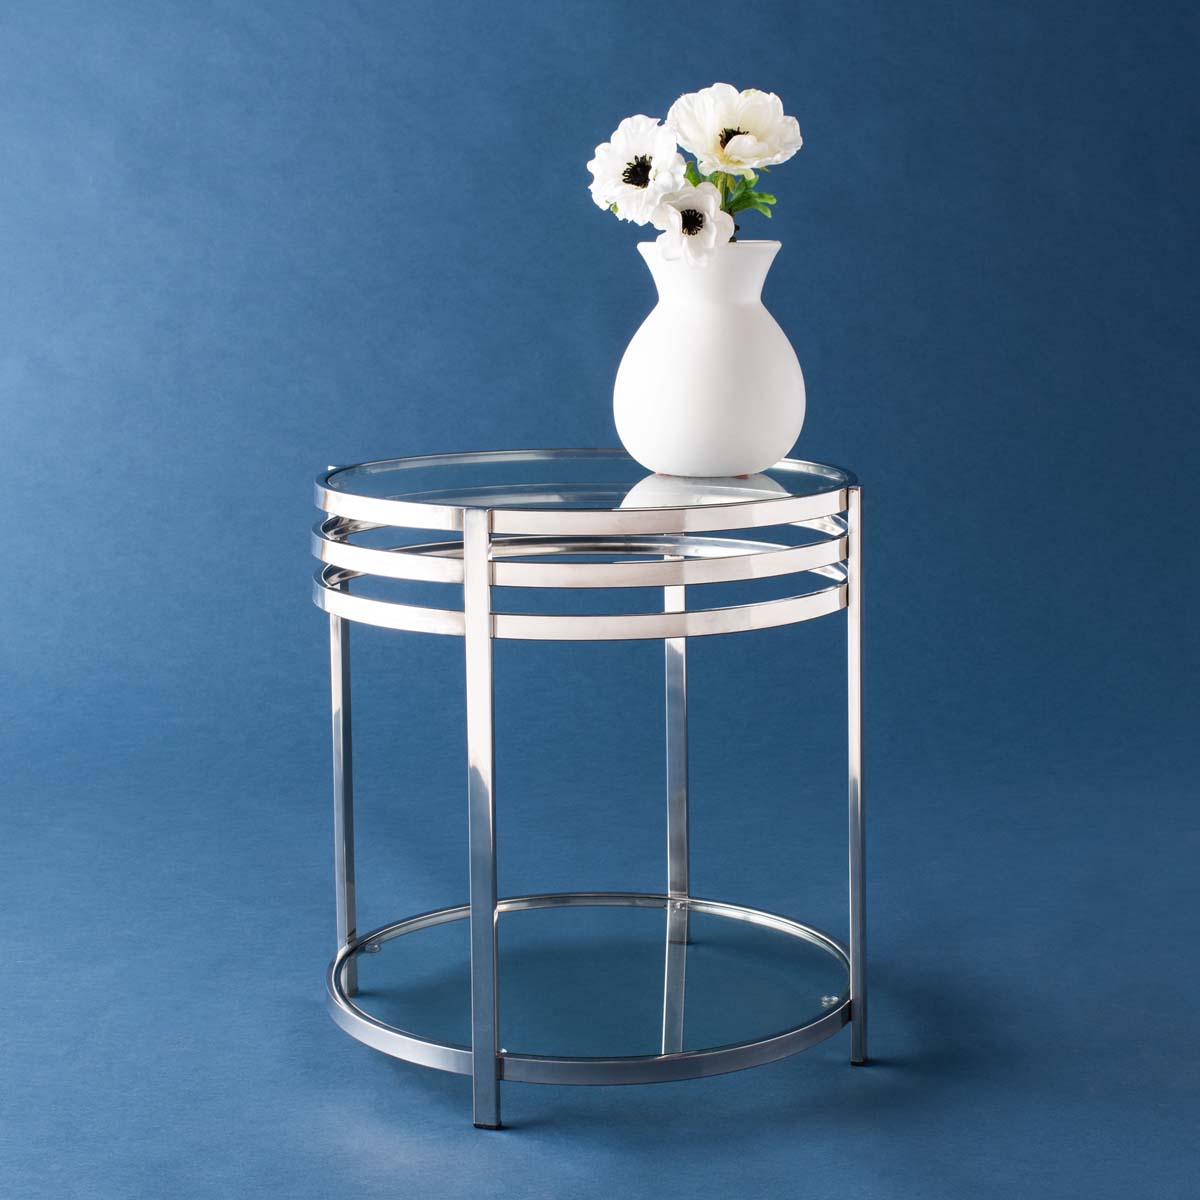 Safavieh Couture Malory Chrome End Table With Glass Top